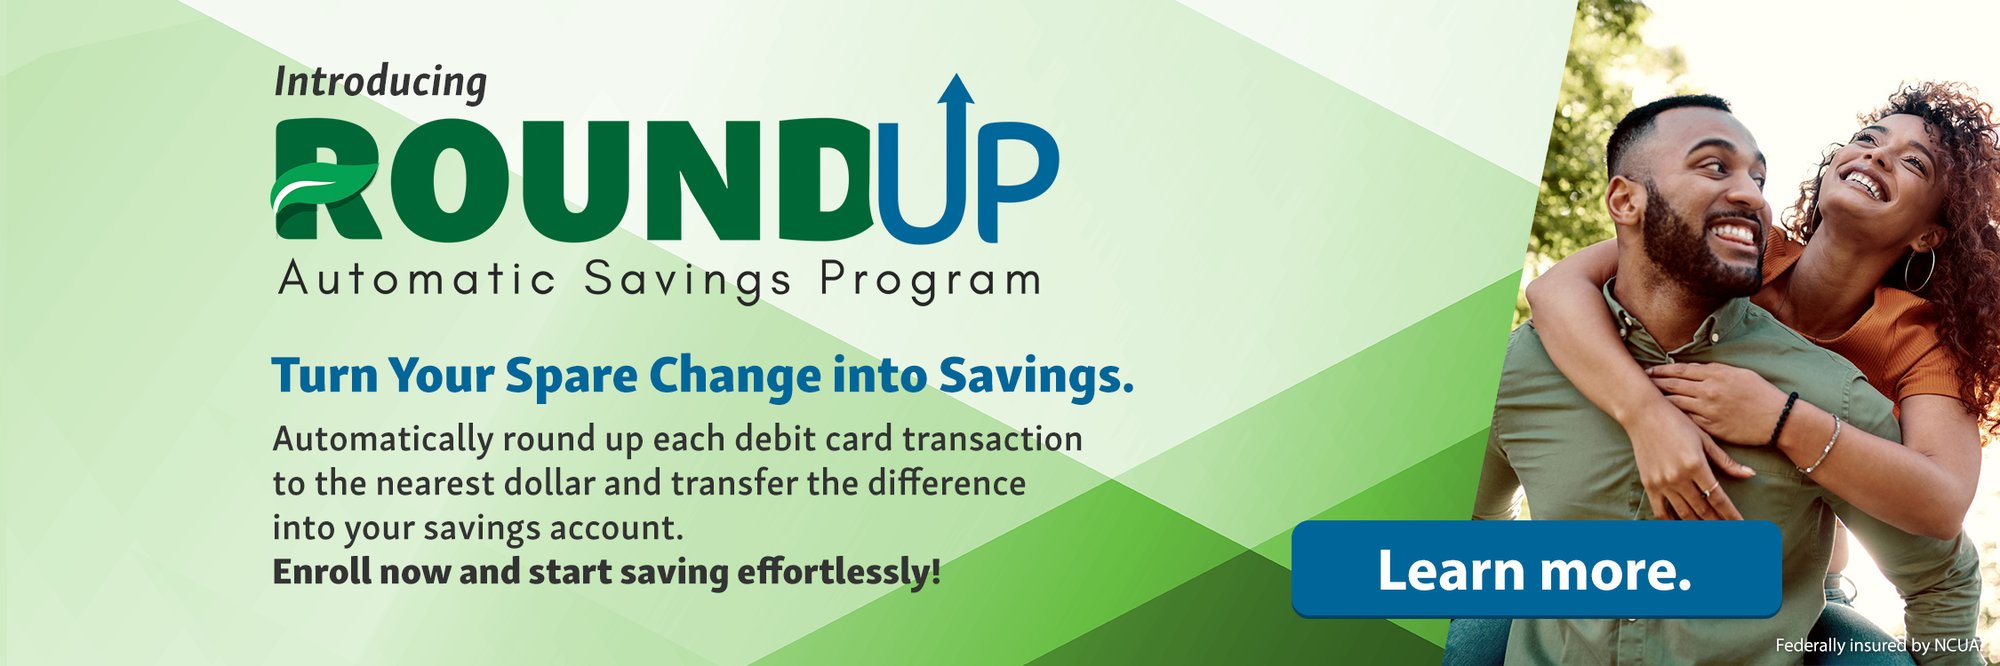 Introducing Round Up Automatic Savings Program. Turn Your Spare Change into Savings. Automatically round up each debit card transaction to the nearest dollar and transfer the difference into your savings account. Enroll now and start saving effortlessly! Learn More.